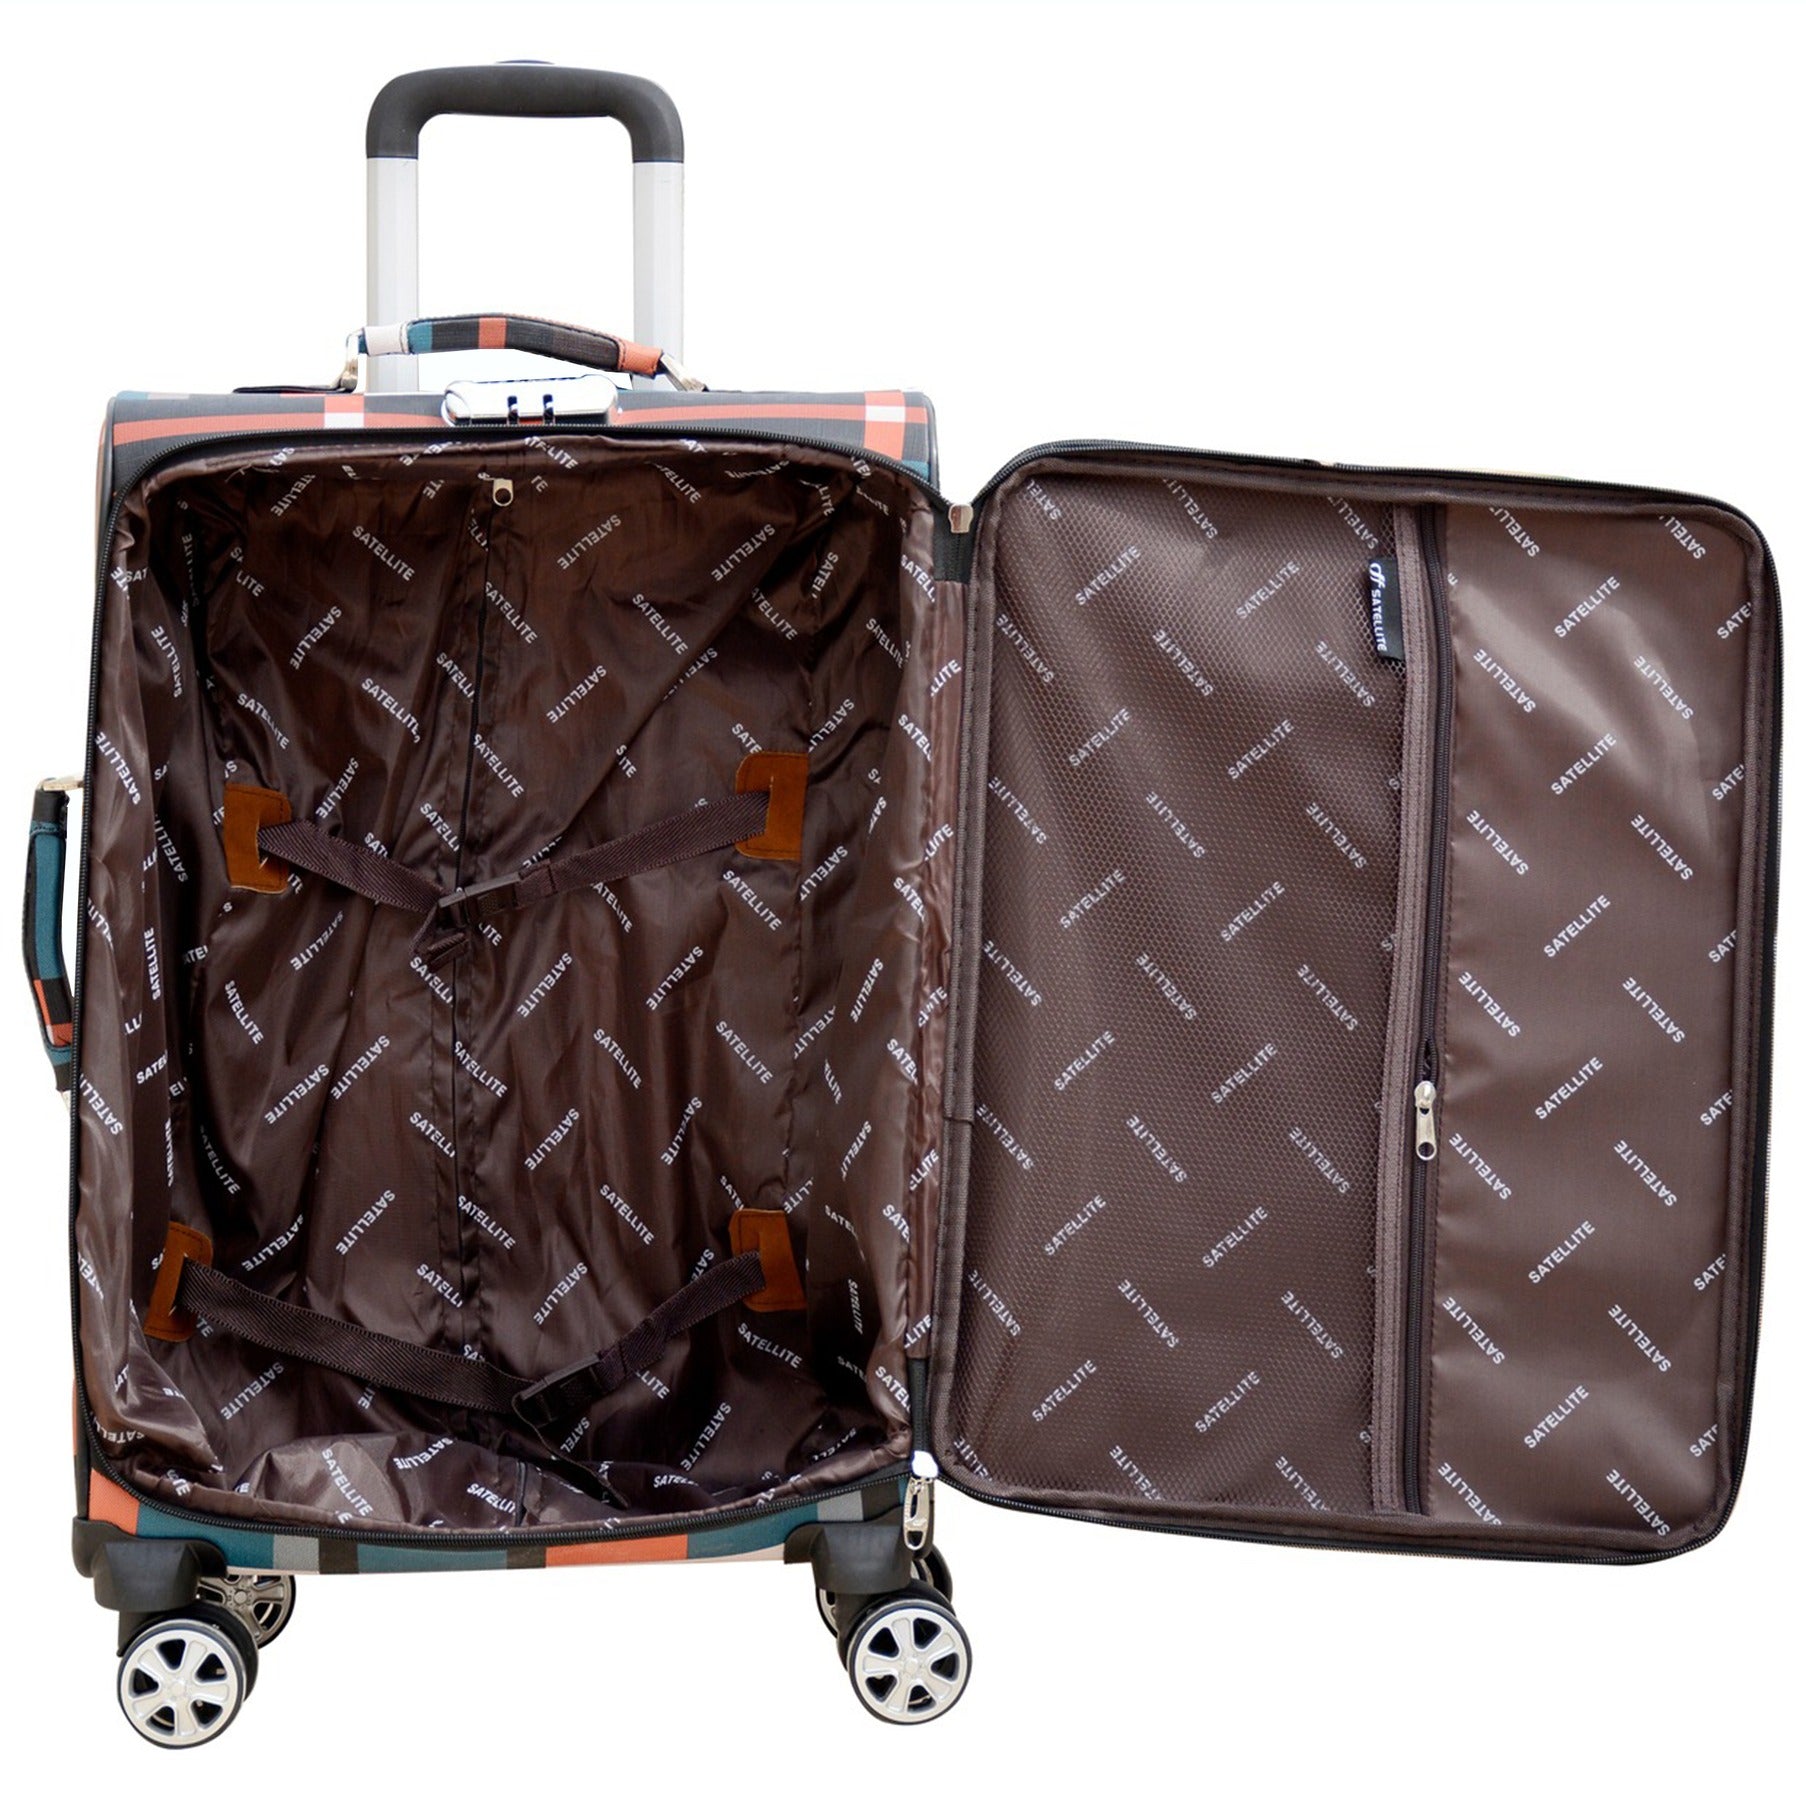 PU Check 40 Kg 4 Wheel Luggage with Beauty Case Combo Set Zaappy